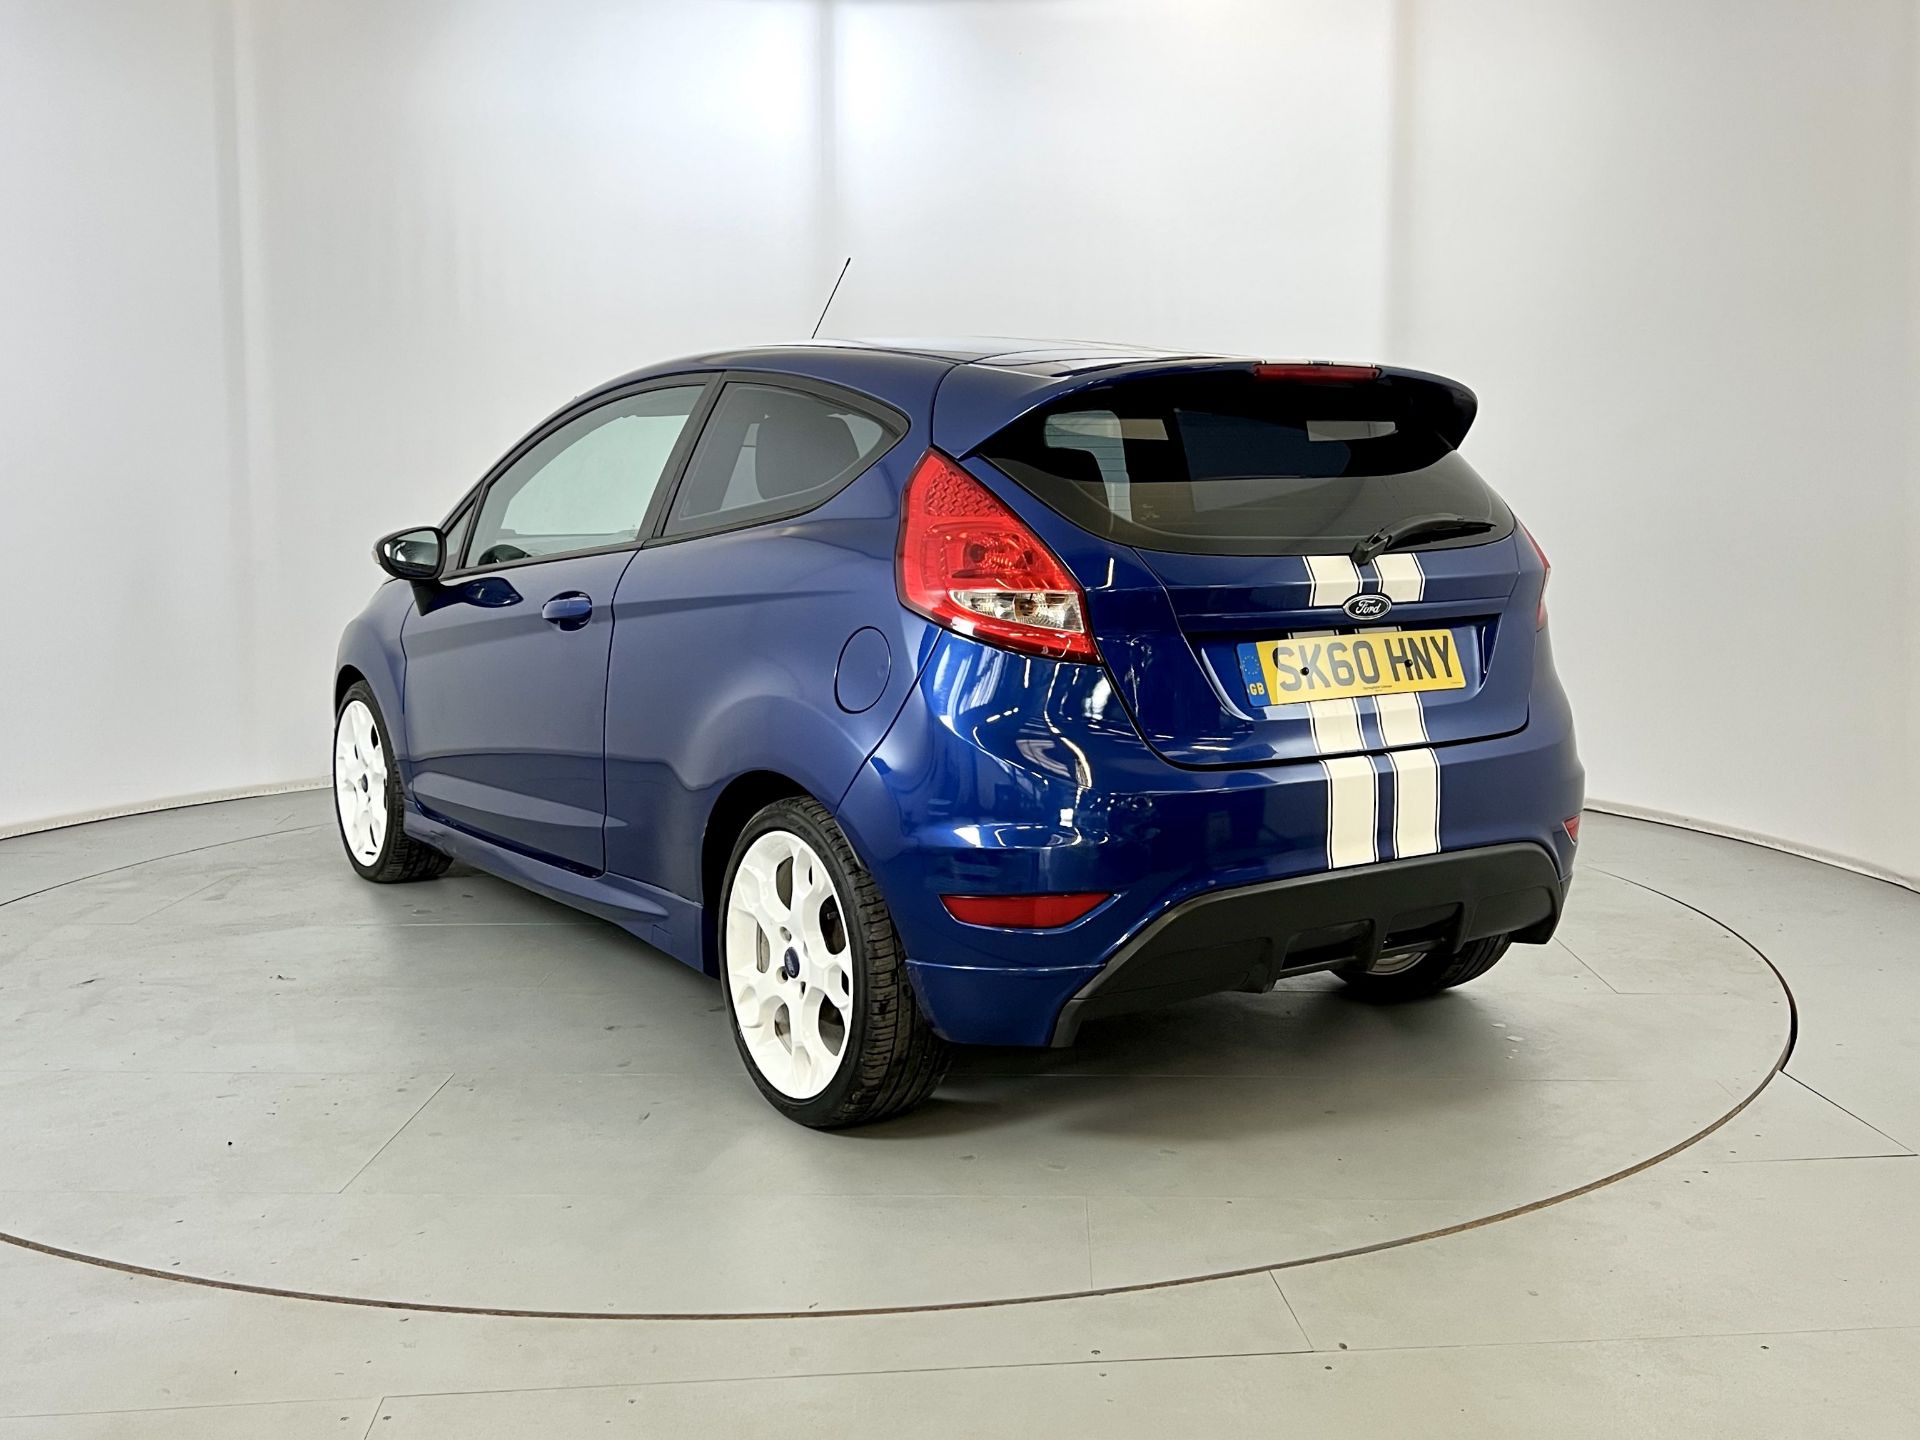 Ford Fiesta S1600 - Image 7 of 30